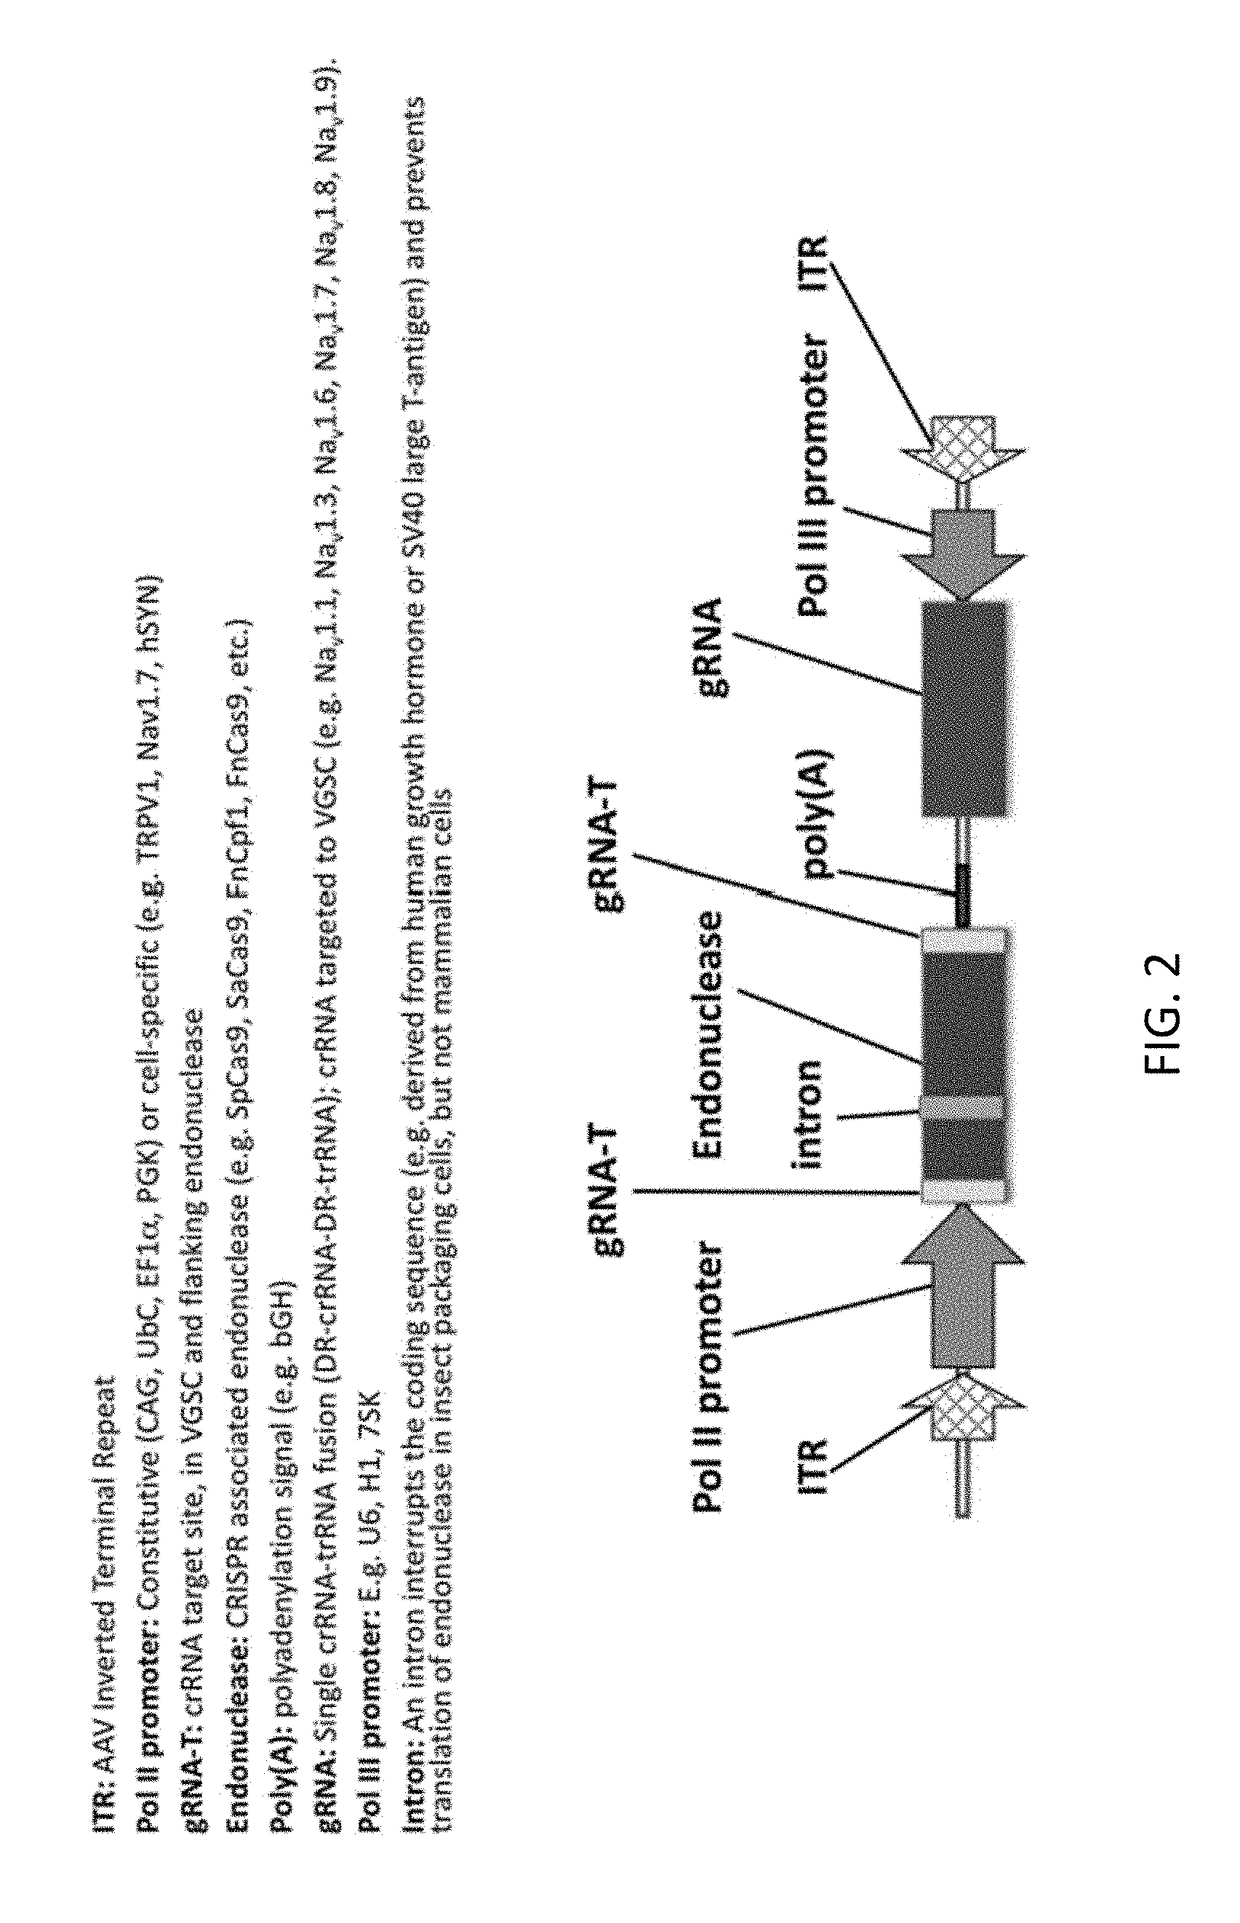 Crispr compositions and methods of using the same for gene therapy